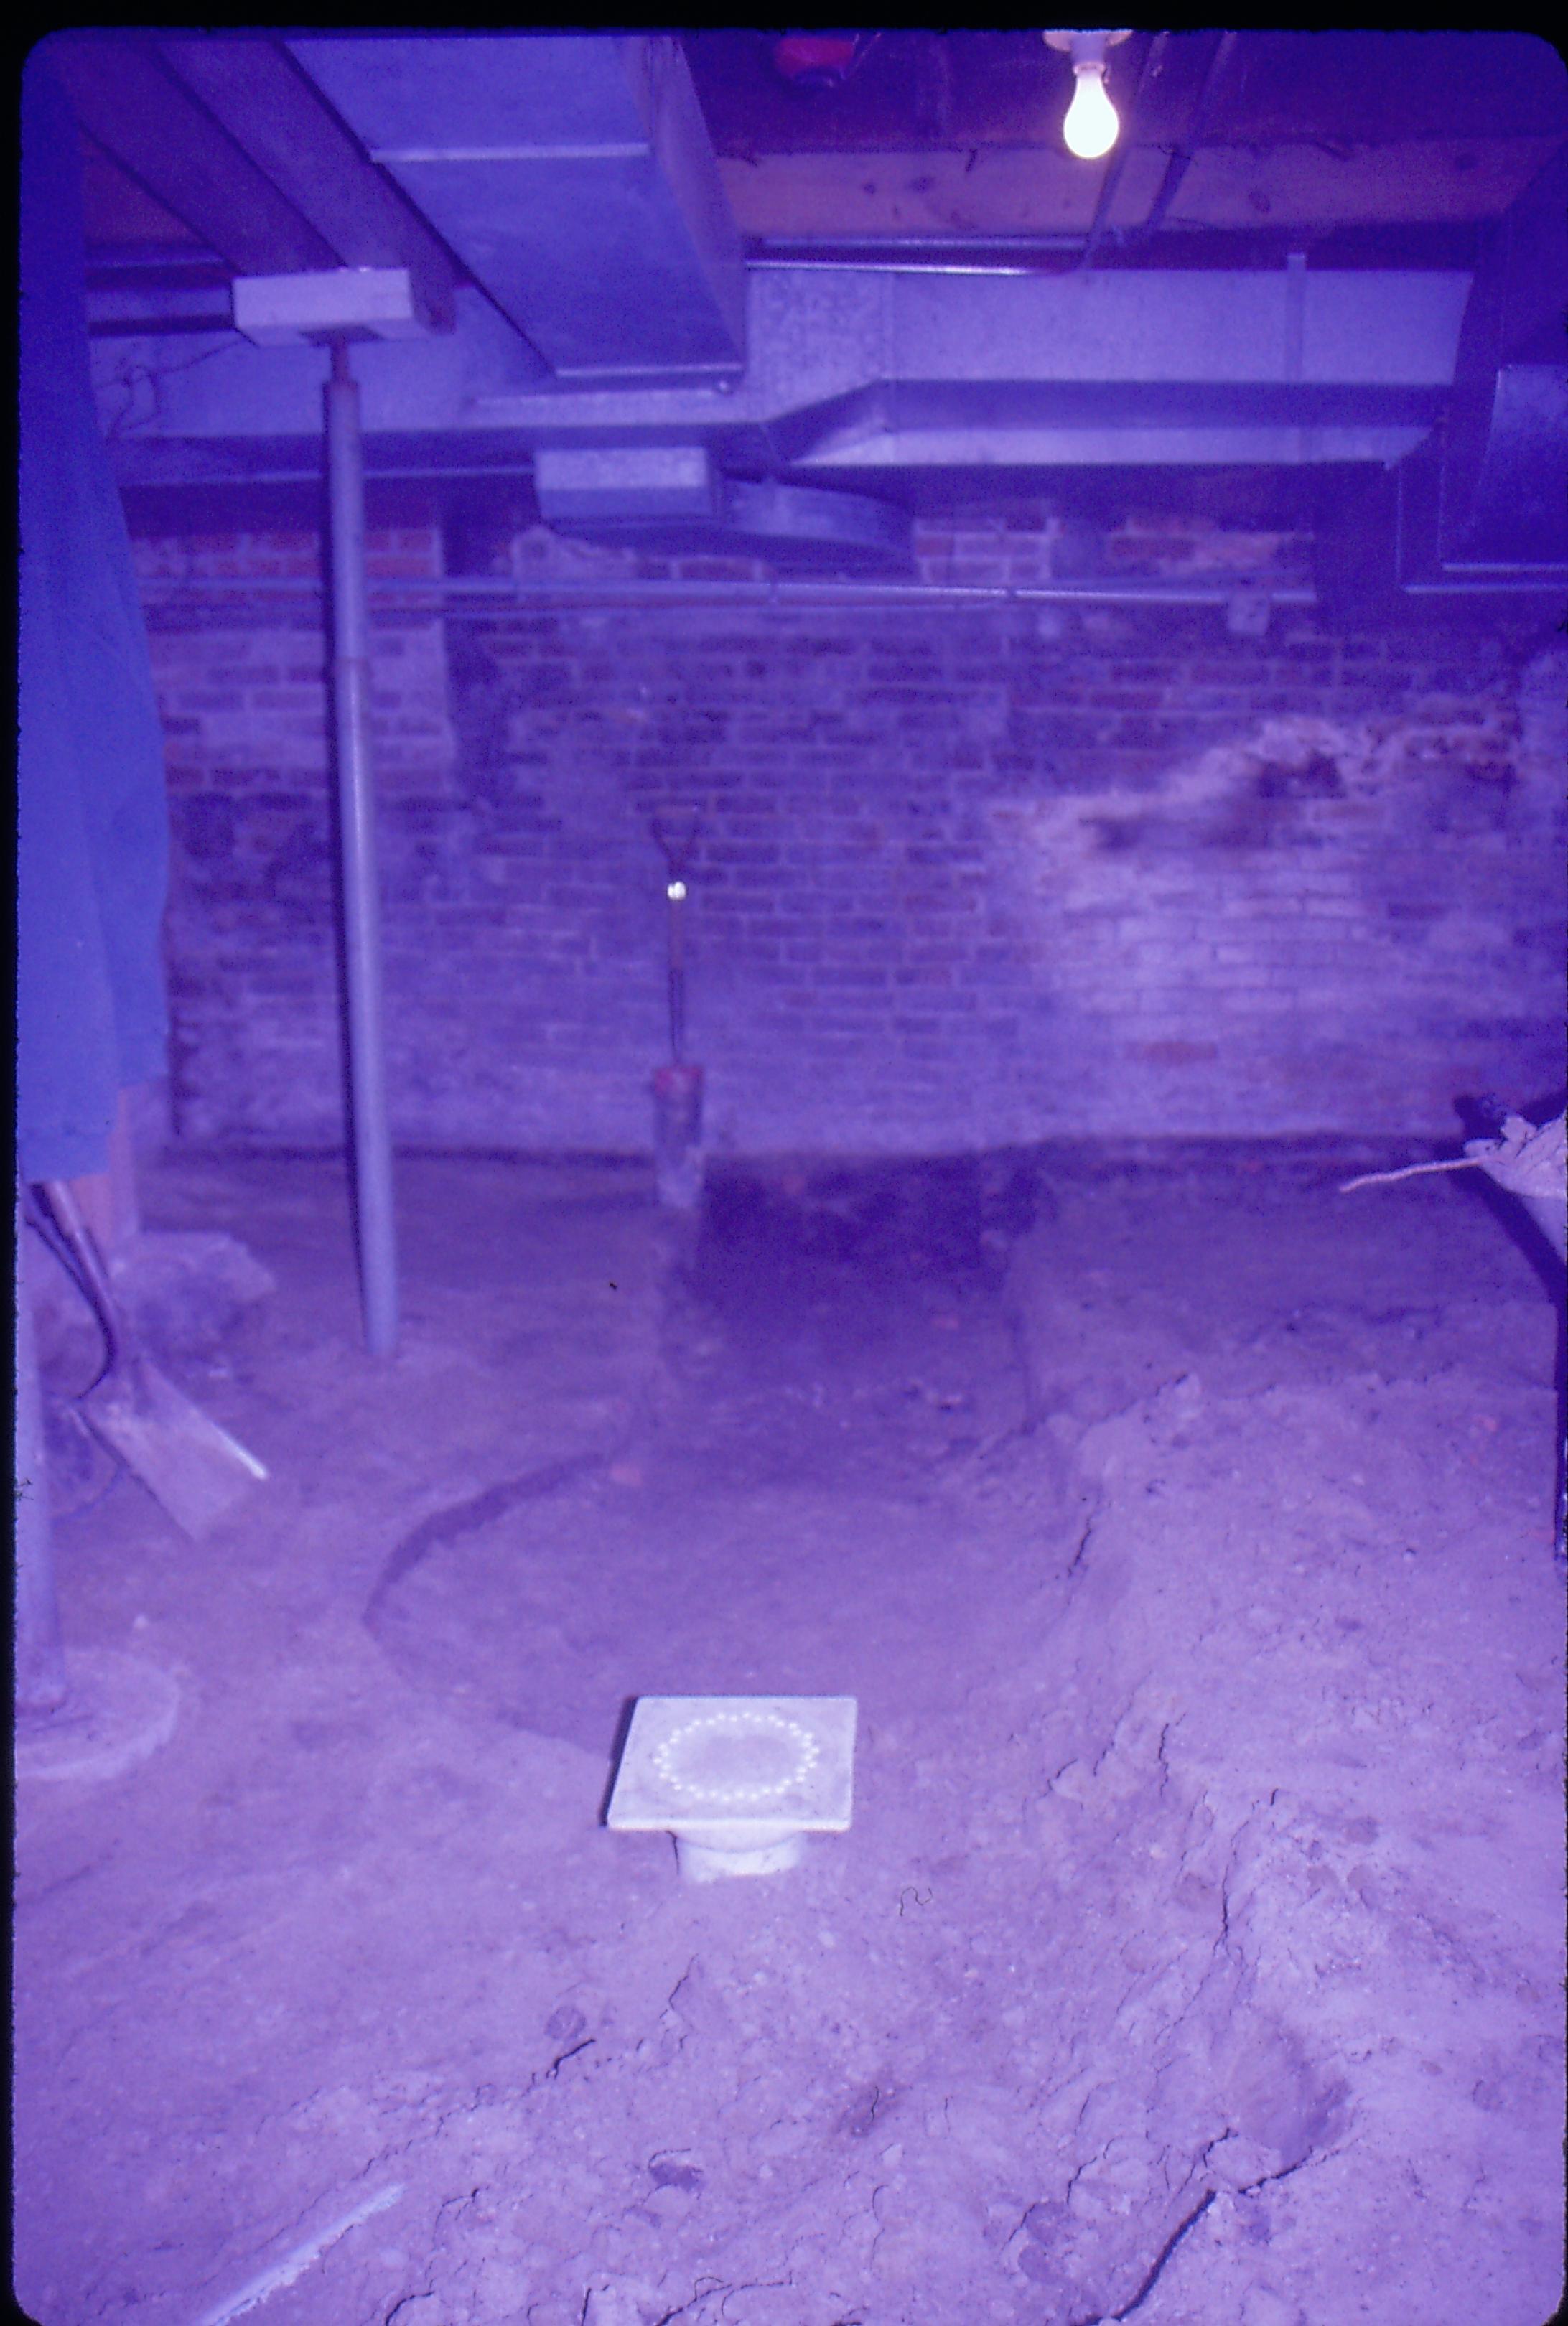 Lyon House - basement floor showing trench running throughout. Square plastic draing cover on edge of cistern/gravity furnace? remnant. Metal supports on left, duct work overhead. Shovels seen on left and leaning on brick wall in background Looking North in basement Lyon, Basement, trench, drain, duct work, cistern